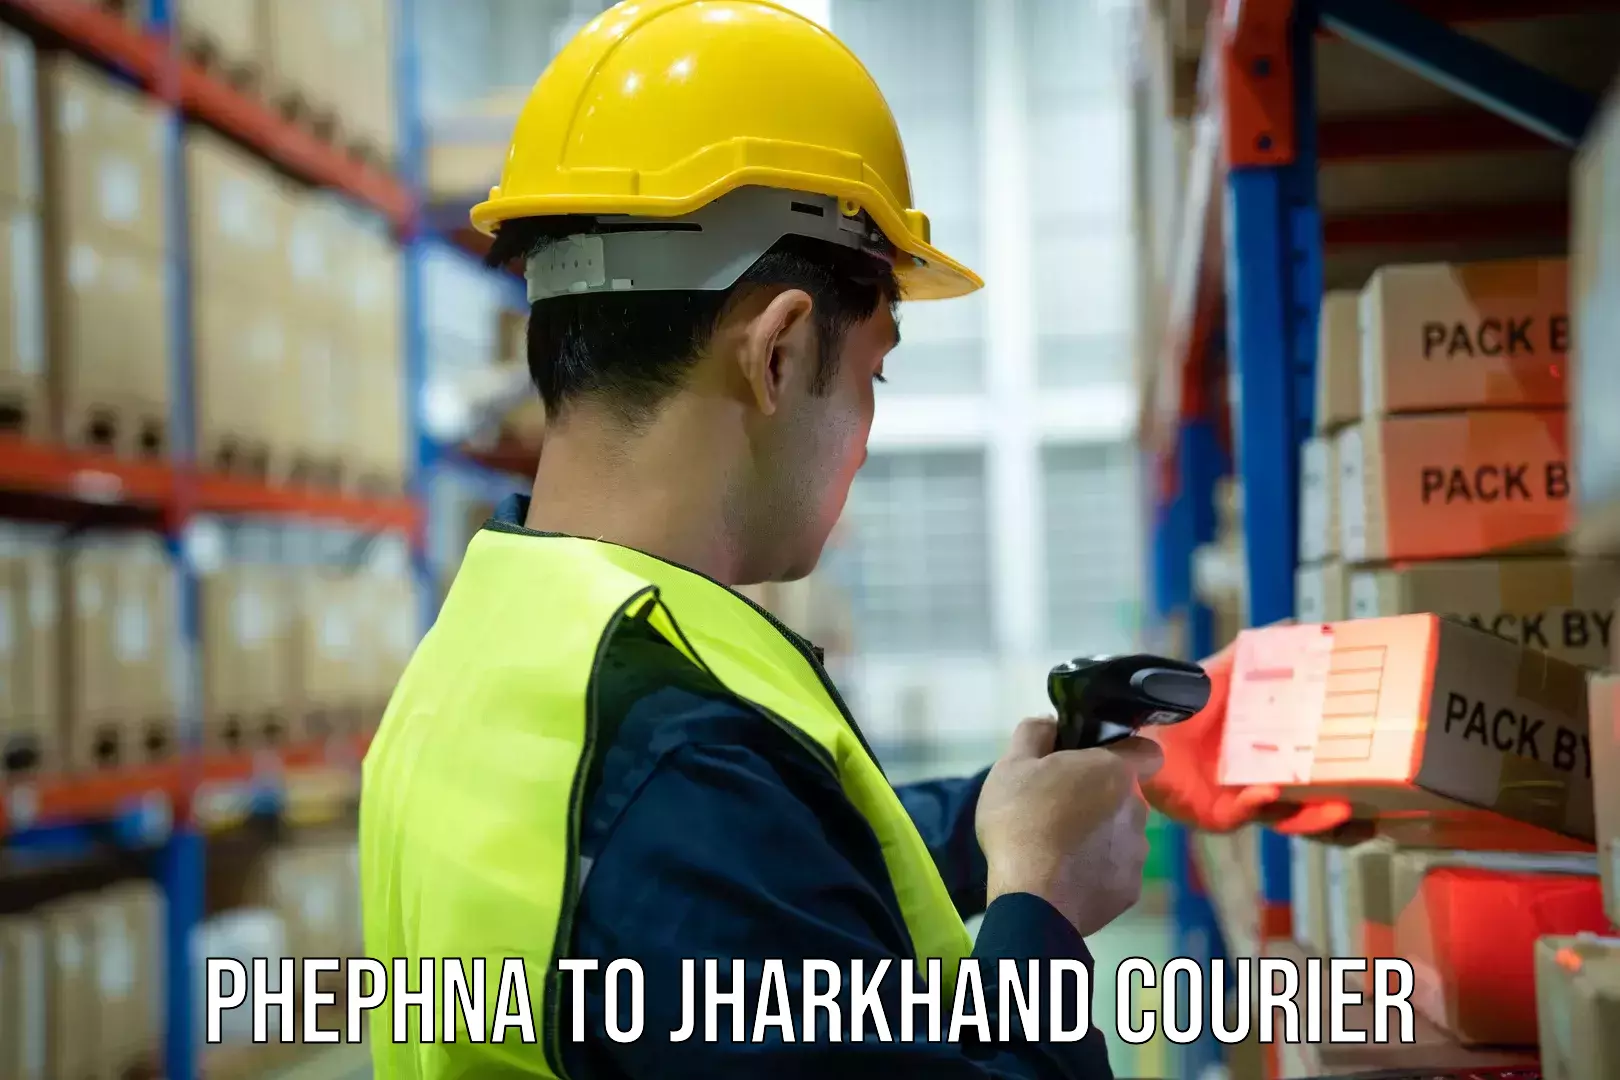 On-call courier service Phephna to Jharkhand